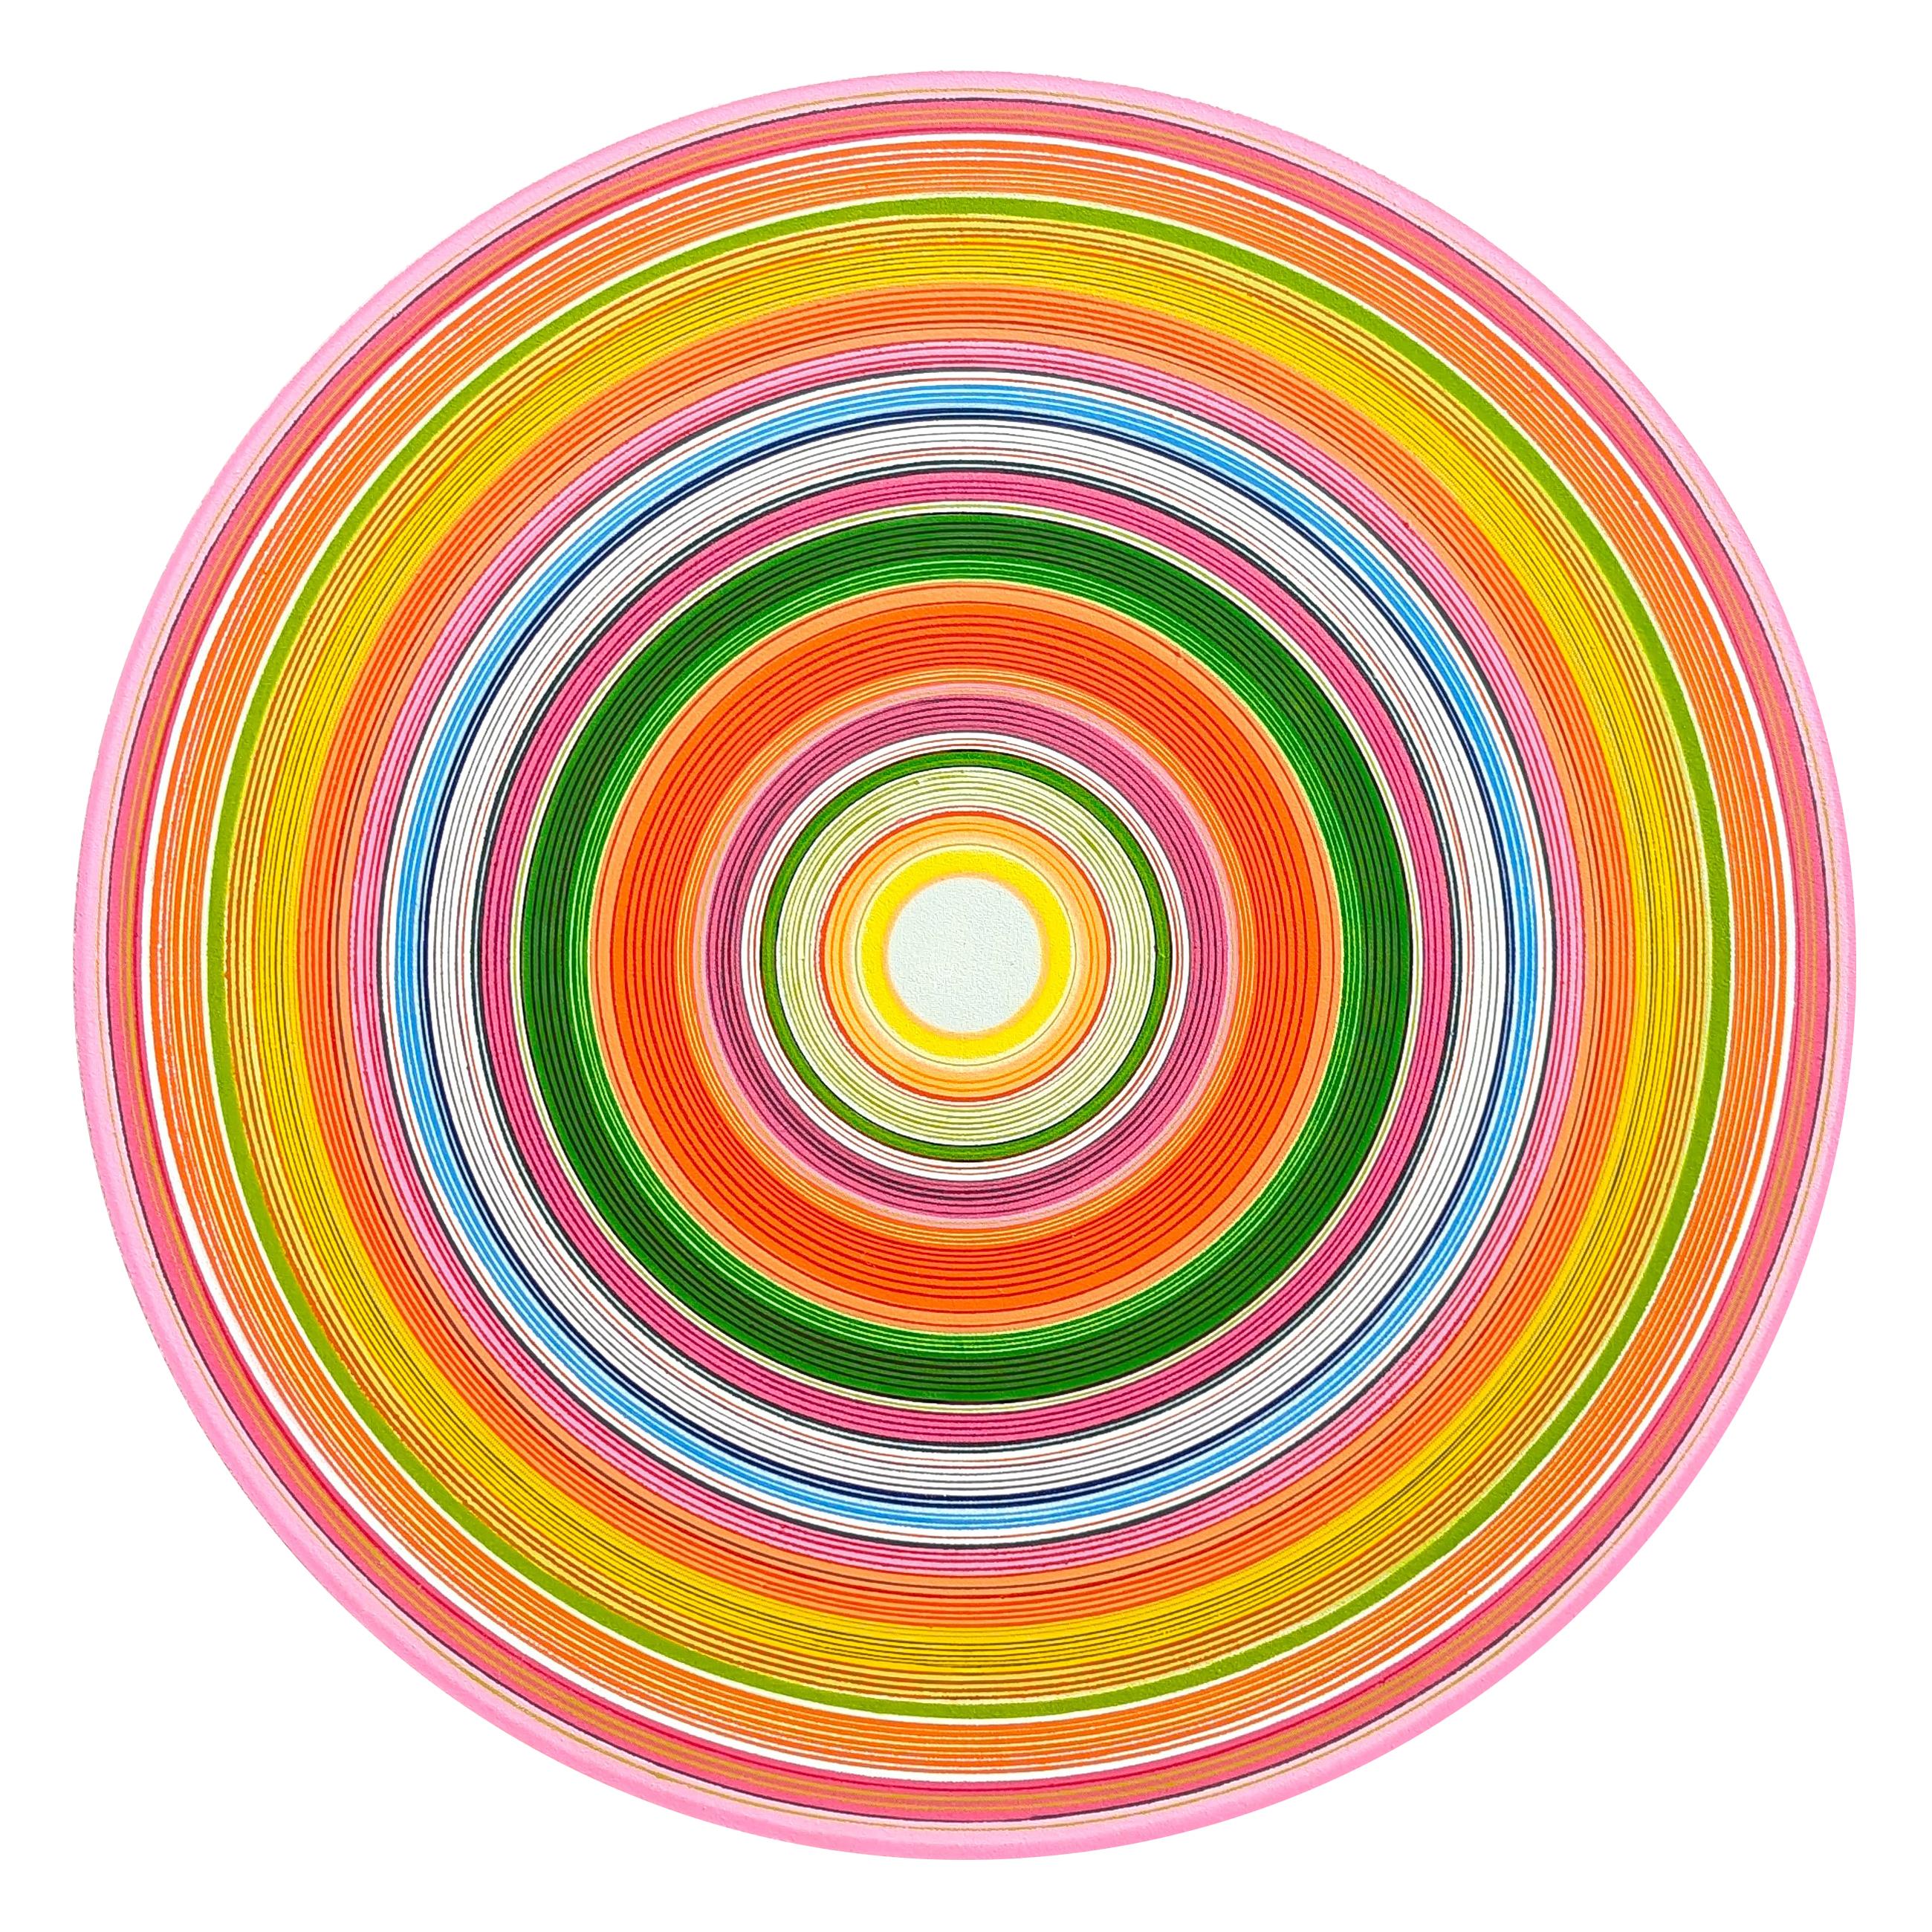 David Hardaker Abstract Painting - "Hot Patootle" Contemporary Abstract Colorful Concentric Circle Painting